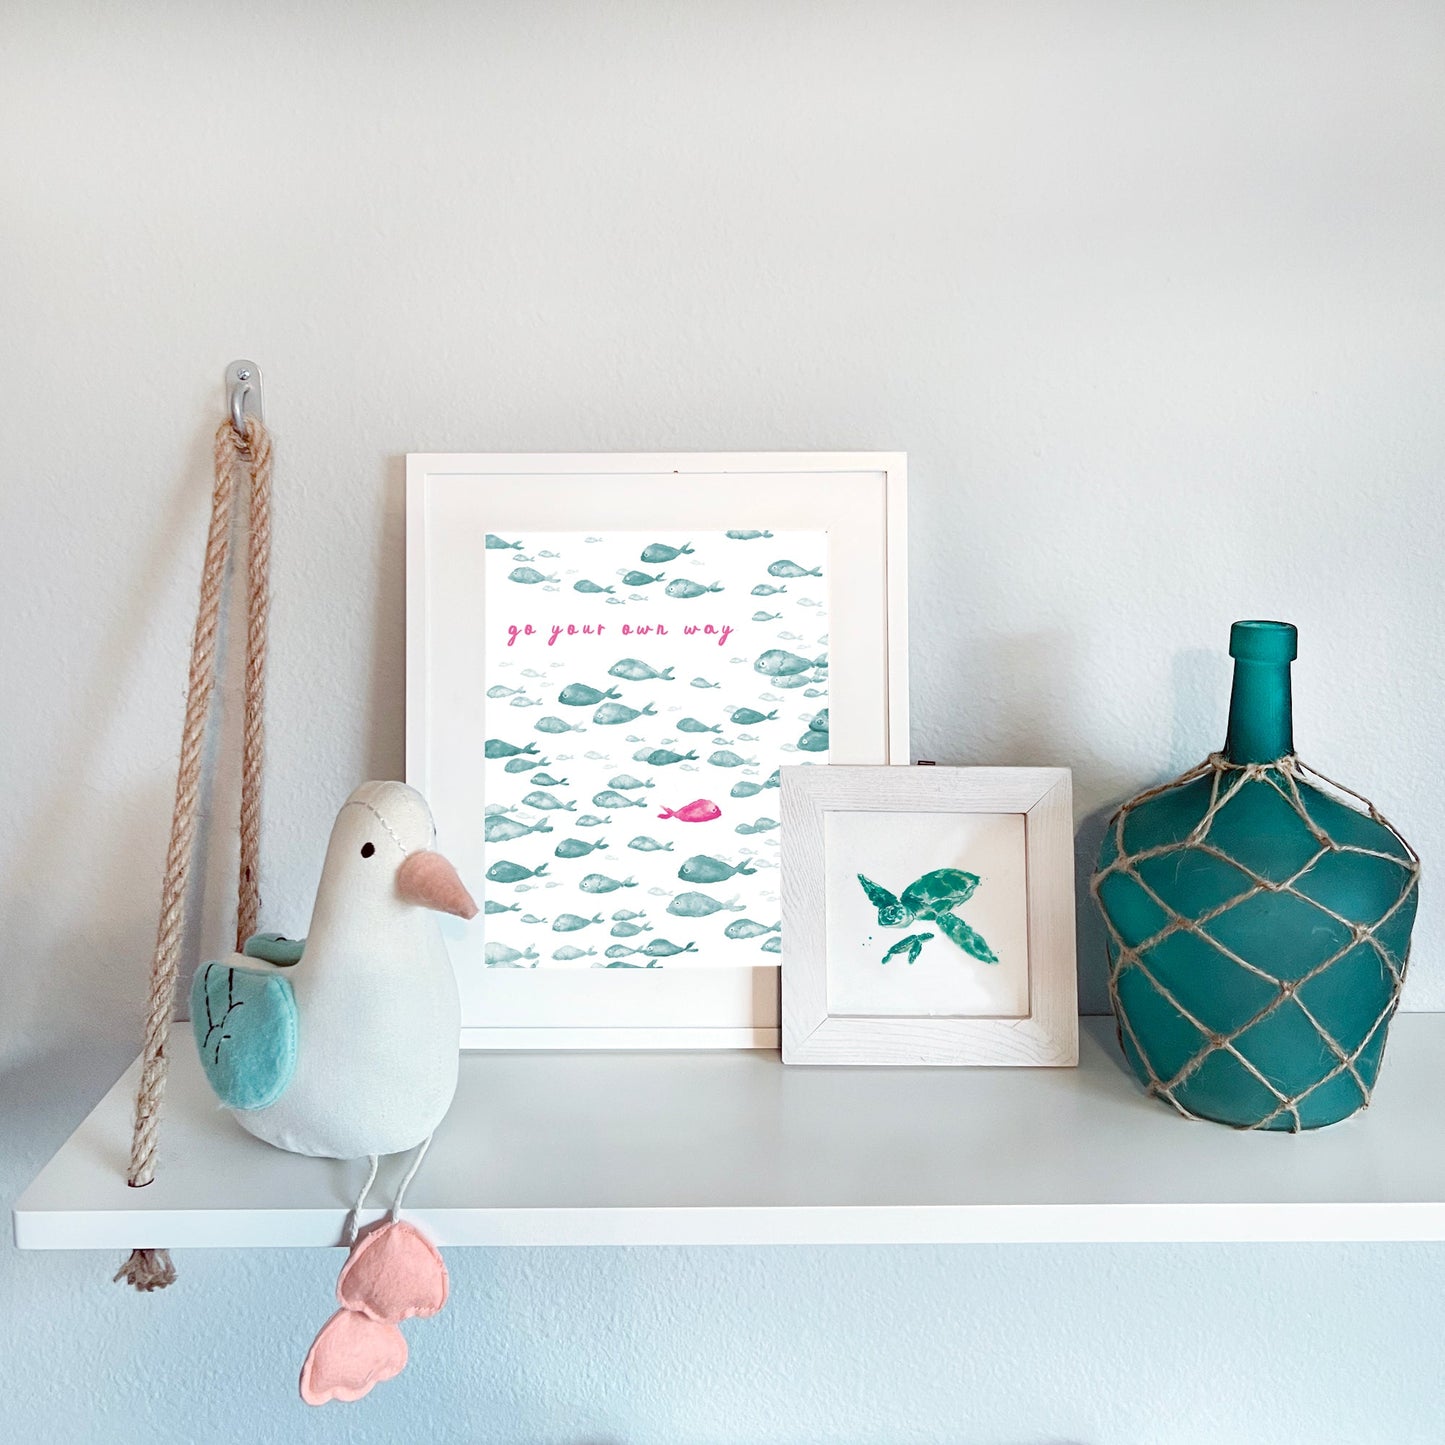 Go Your Own Way Watercolor Fish Print, Art for Kids Room